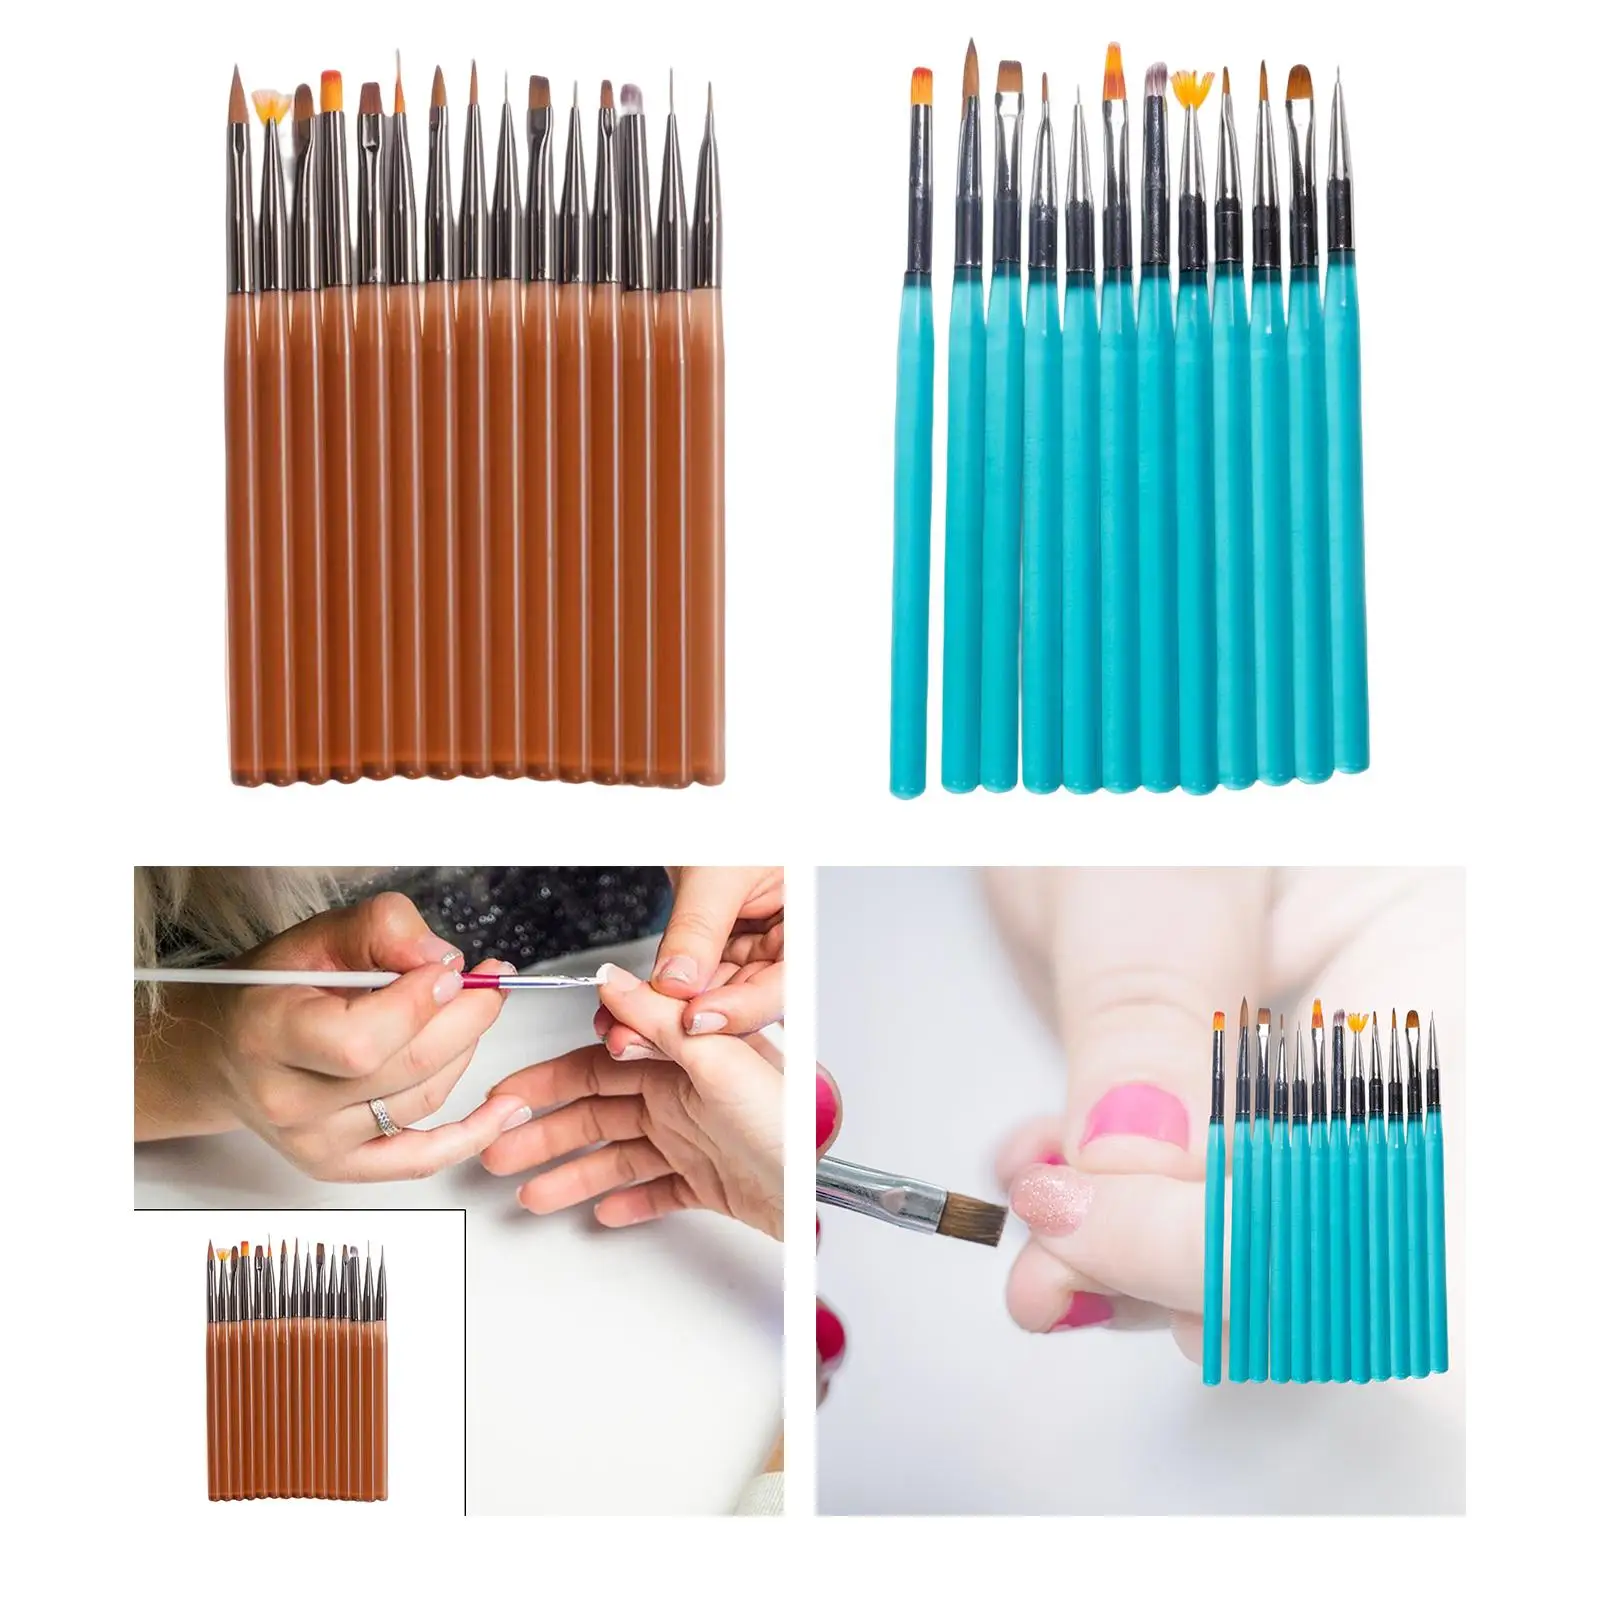 Nail Art Brushes Set Painting Tools for Women Girls Lightweight for Home